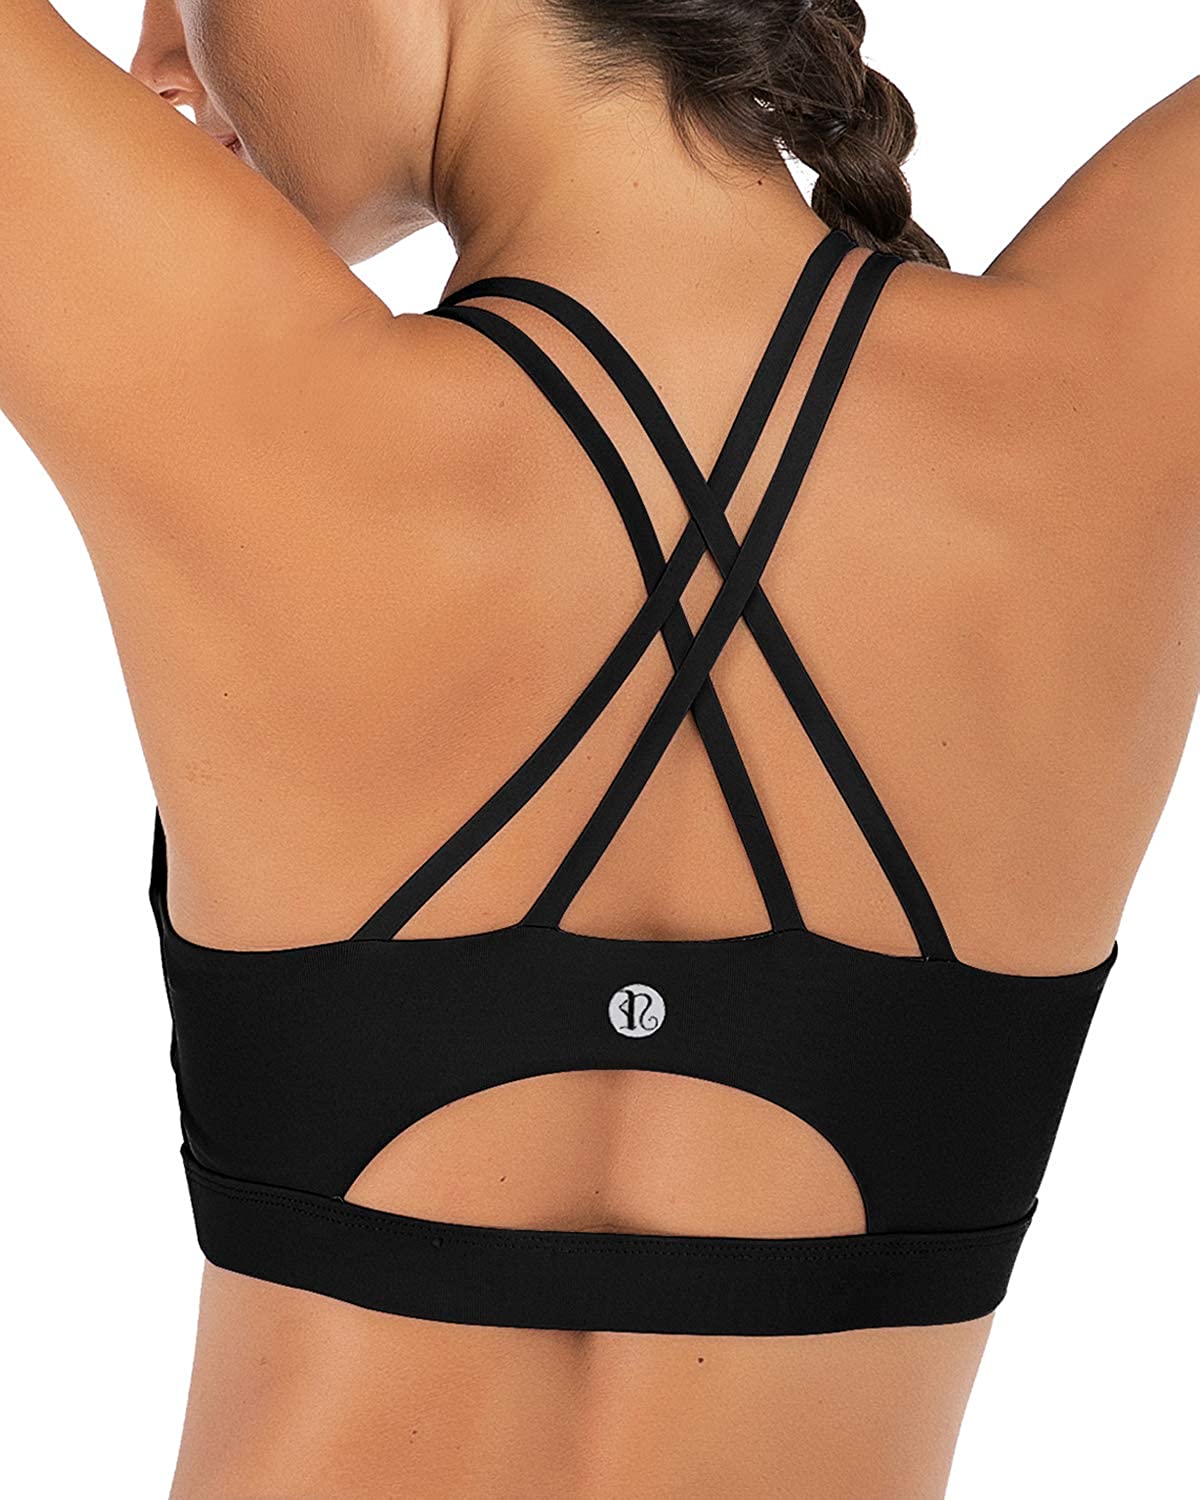 Price:$15.99 RUNNING GIRL Strappy Sports Bra for Women, Sexy Crisscross Back Medium Support Yoga Bra with Removable Cups at Amazon Women’s Clothing store